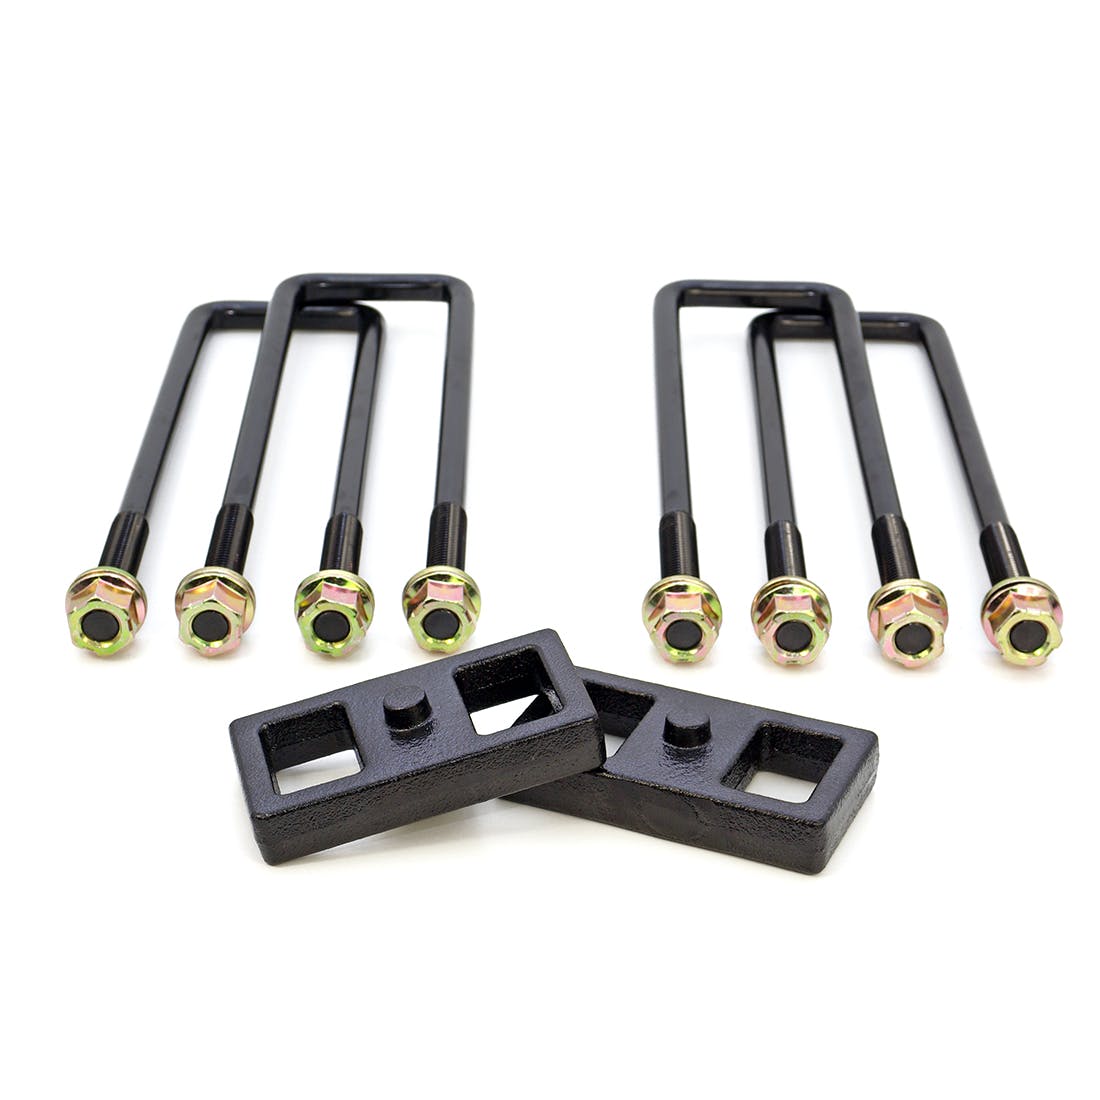 ReadyLIFT 66-3121 1" Rear Block Kit for use with Factory Top Overloads